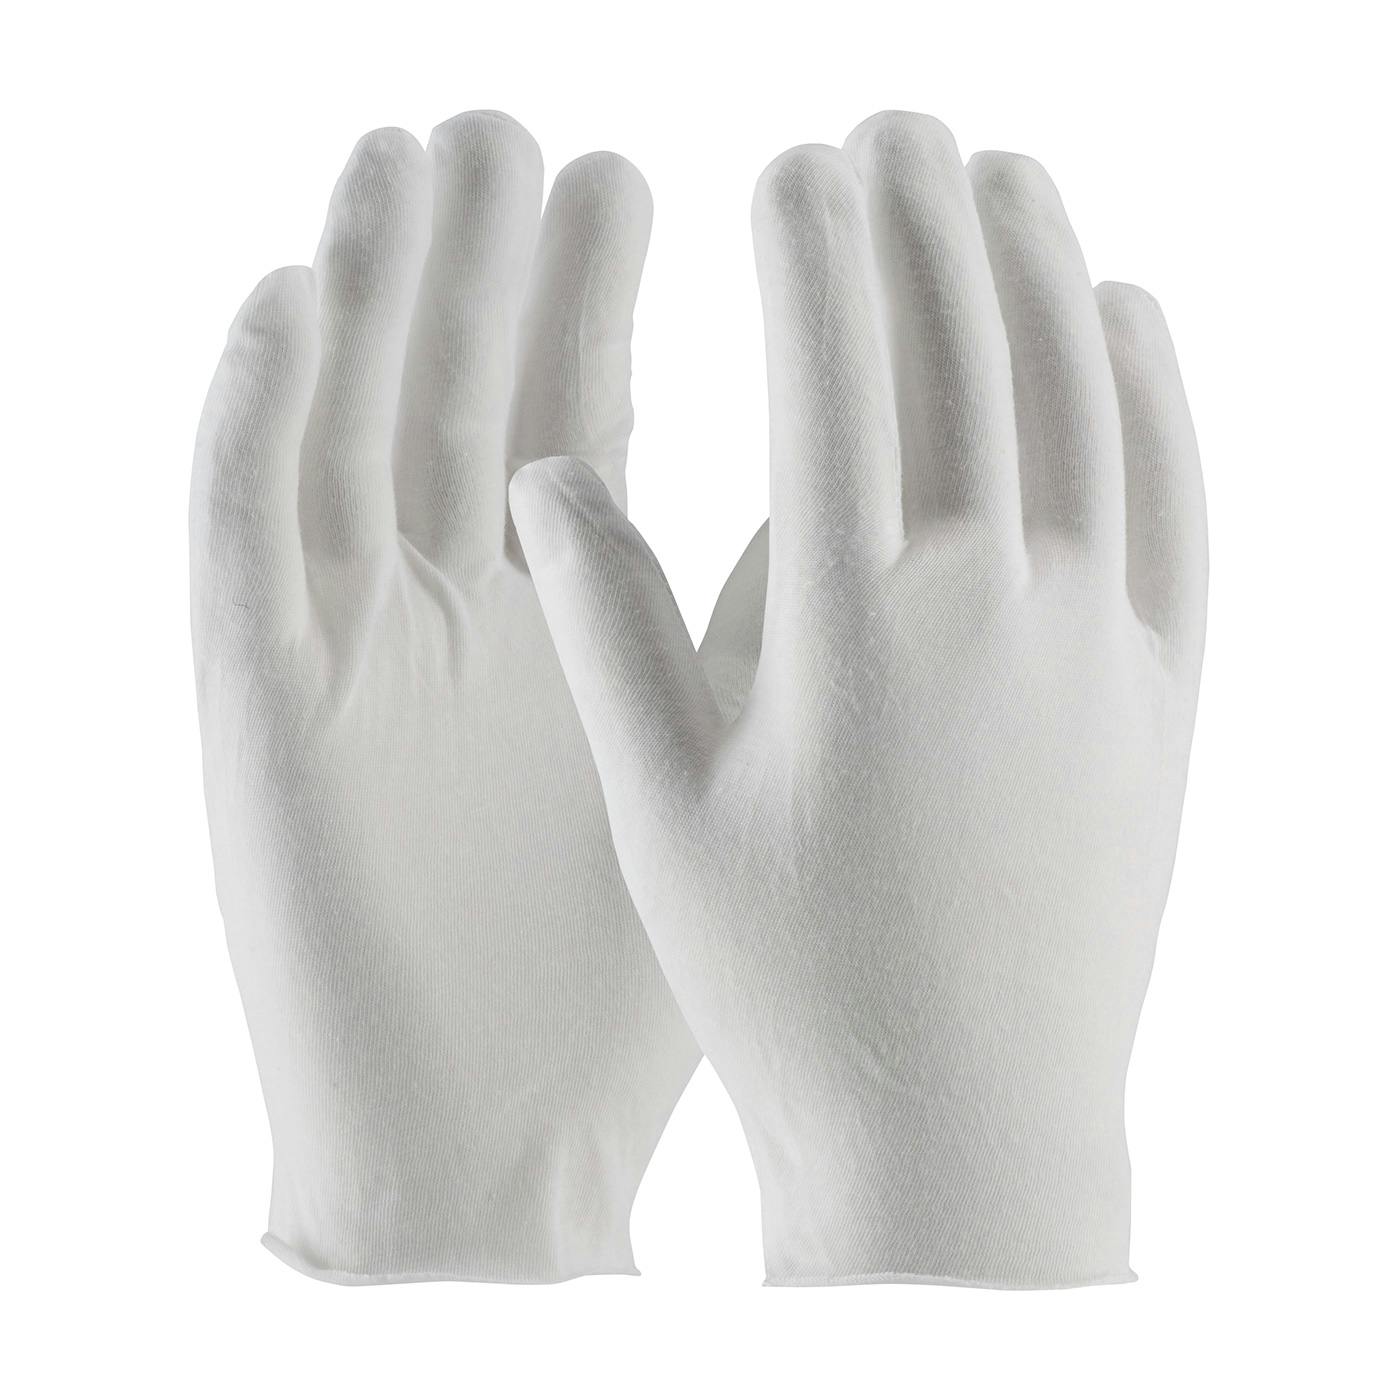 Economy, Light Weight Cotton Lisle / Polyester Inspection Glove with Unhemmed Cuff - Men's, White (97-510) - MENS